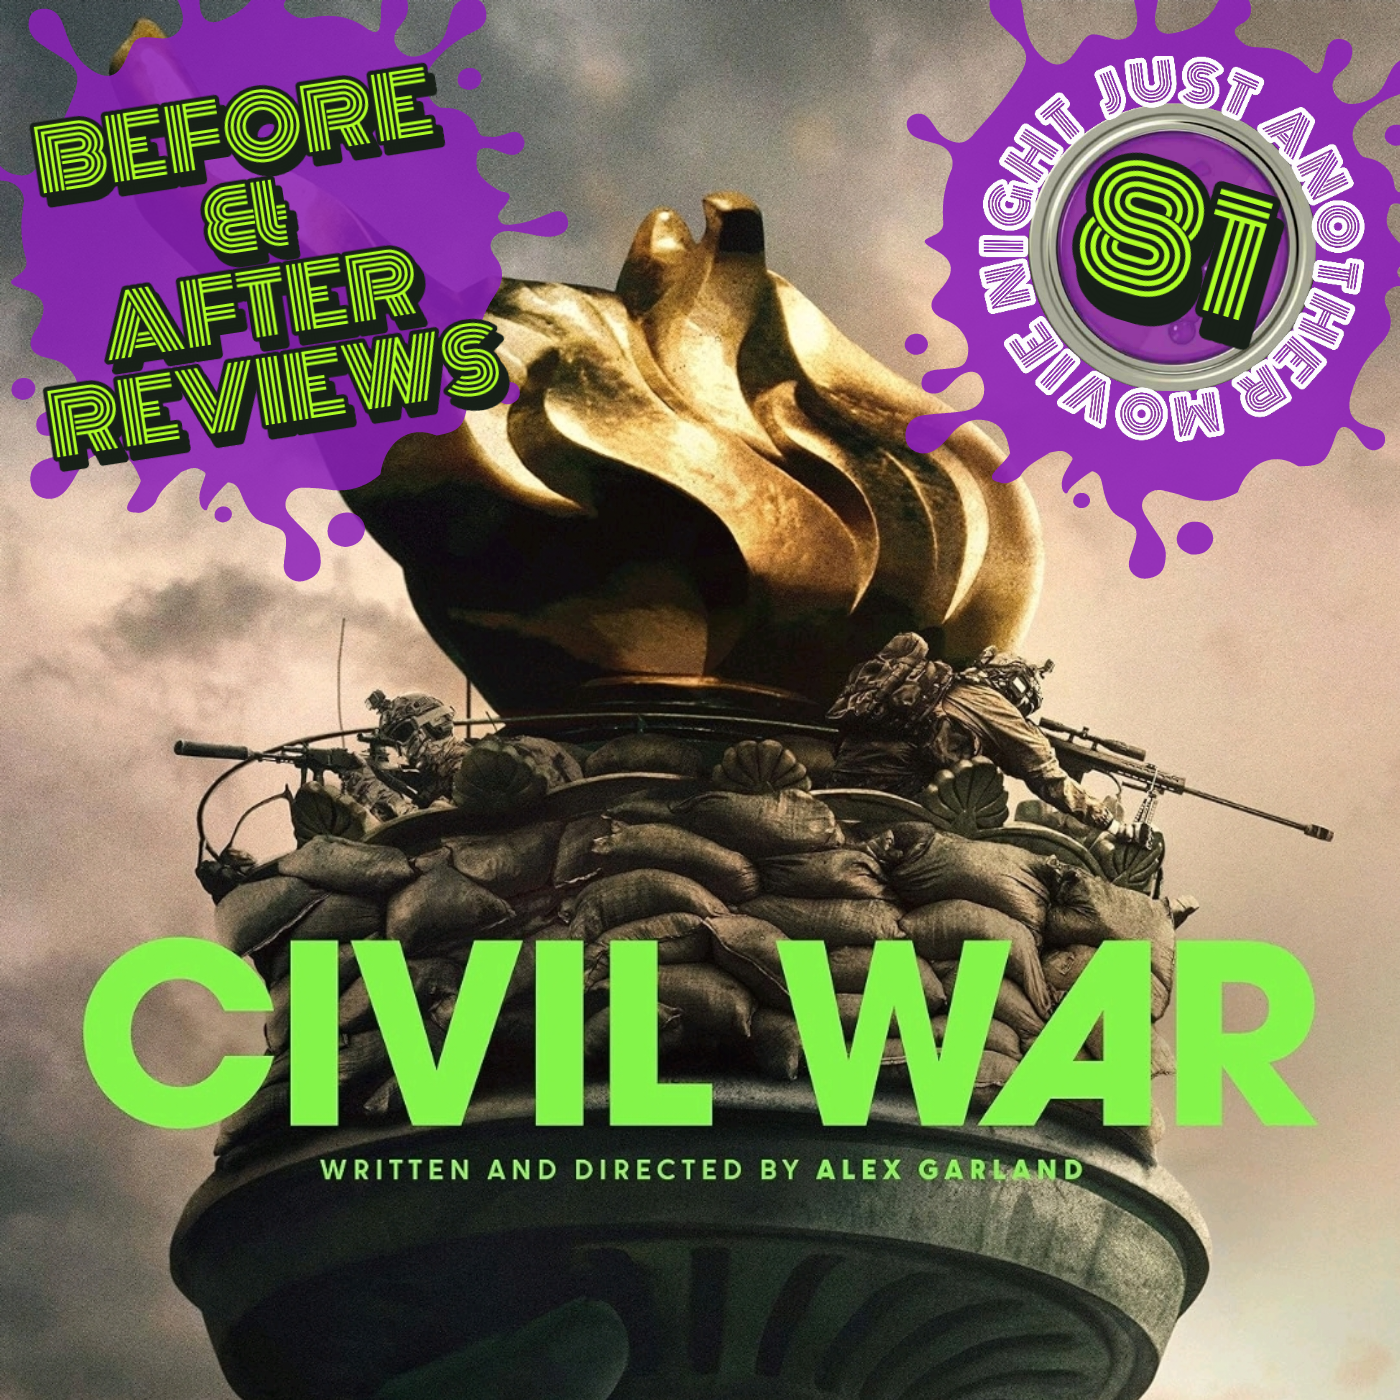 Before and After reviews episode 81: Civil War